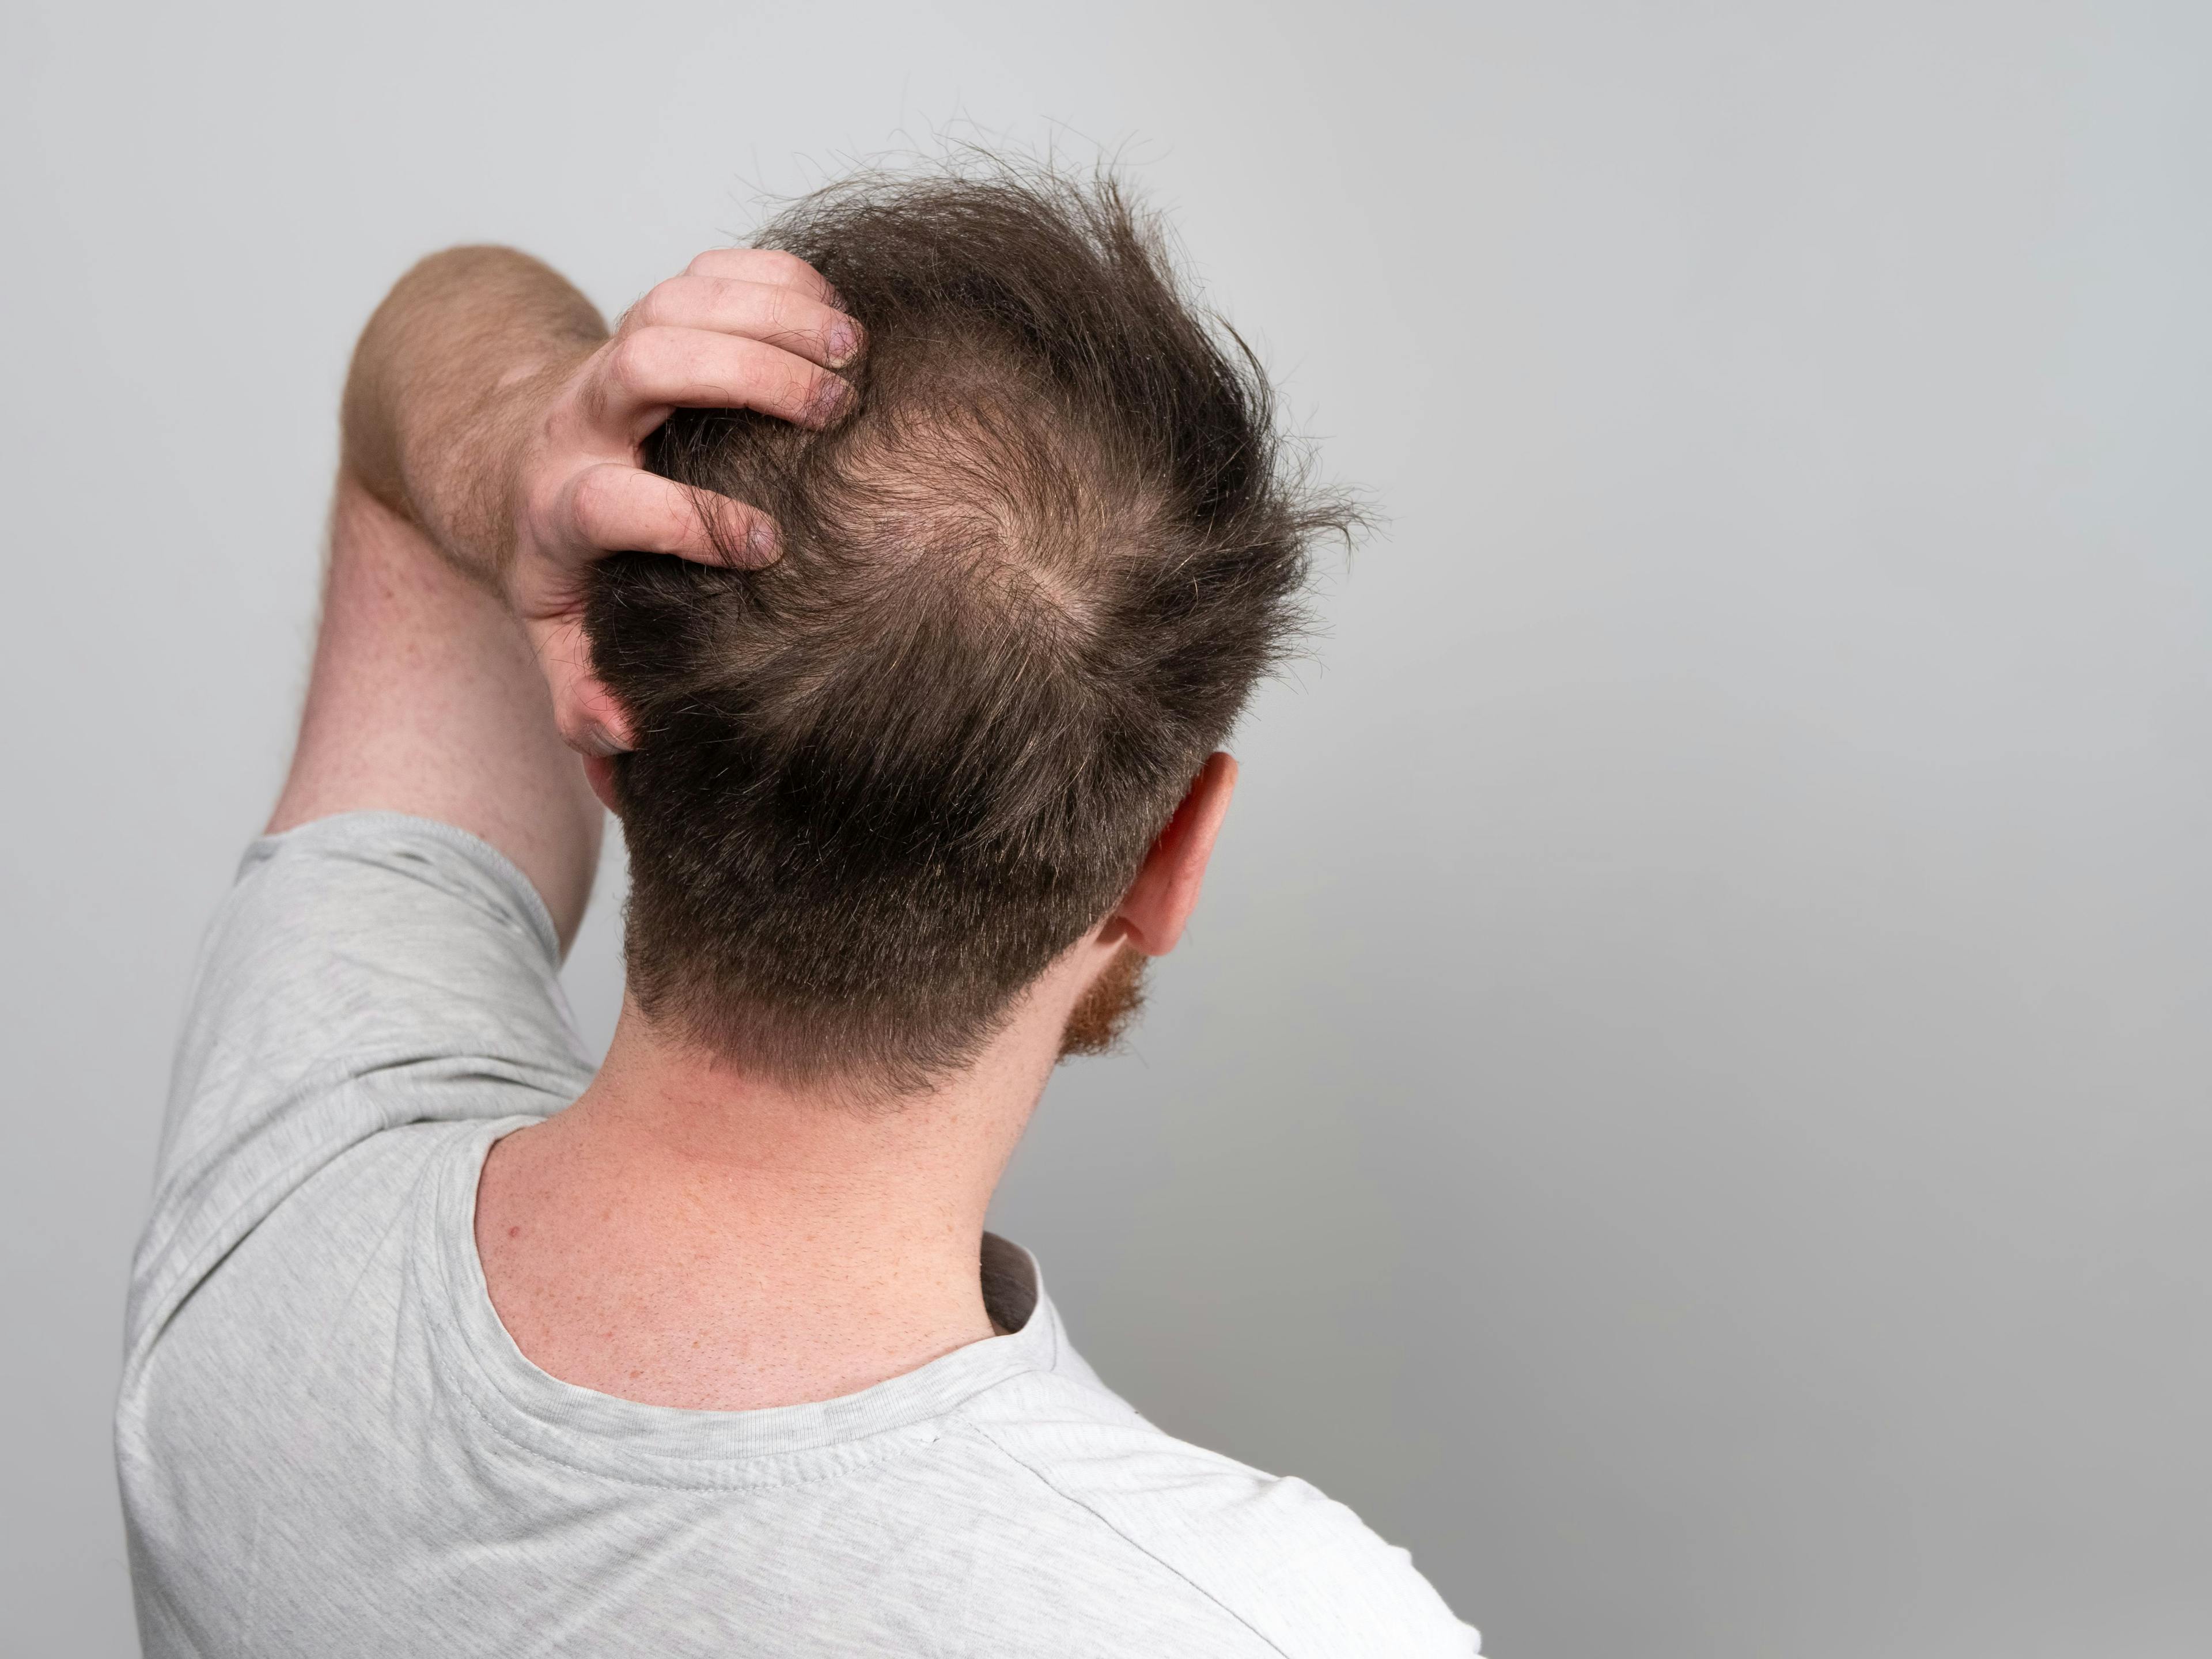 Smoking Cigarettes Associated With Higher Odds of Disease Progression in Male Pattern Hair Loss